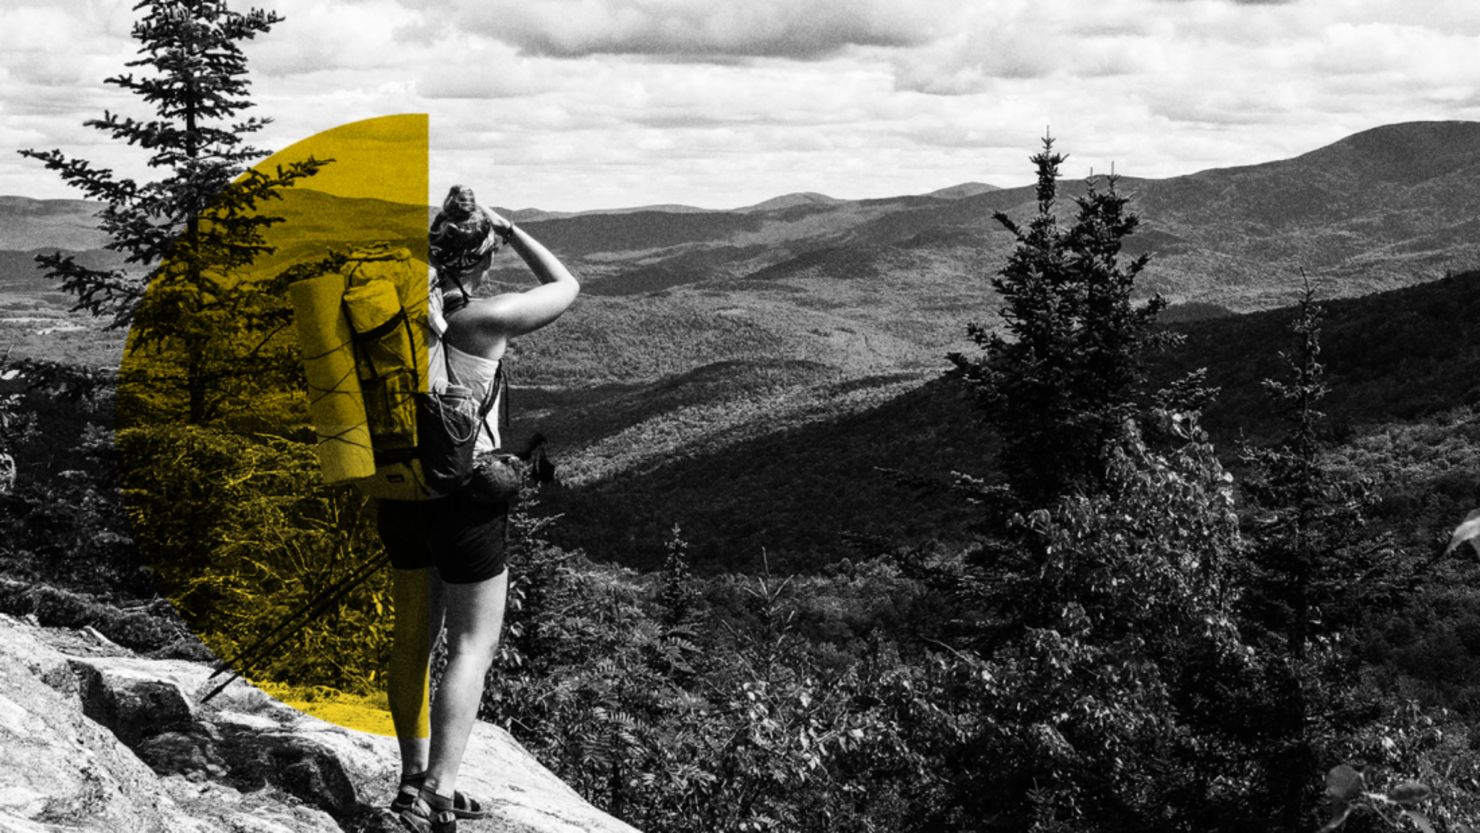 Backpacking for beginners: How to get started, what you need and more tips